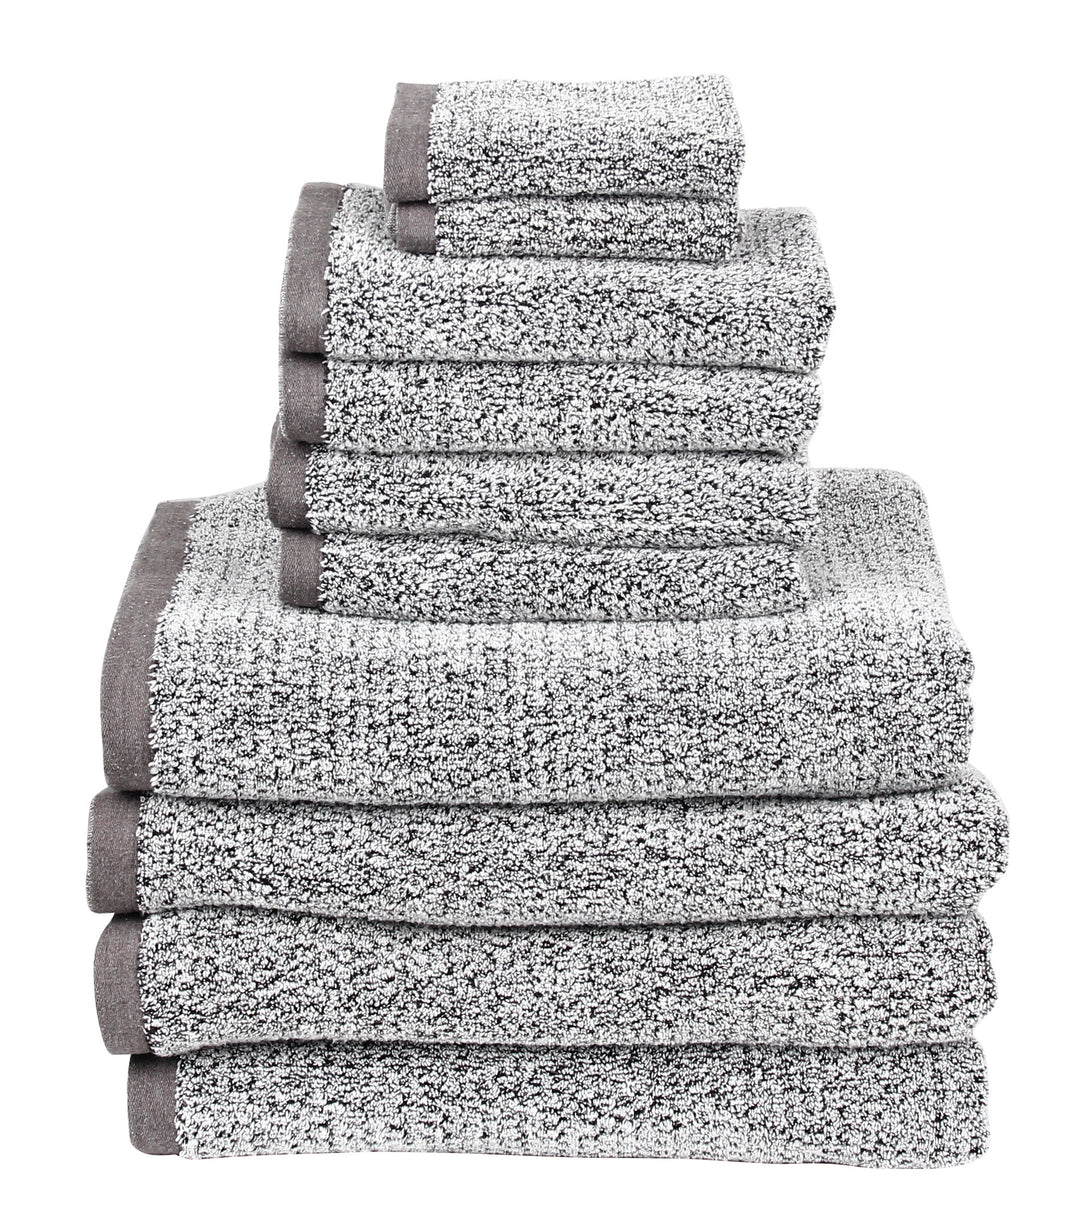 Luxury Plush Towel Collection